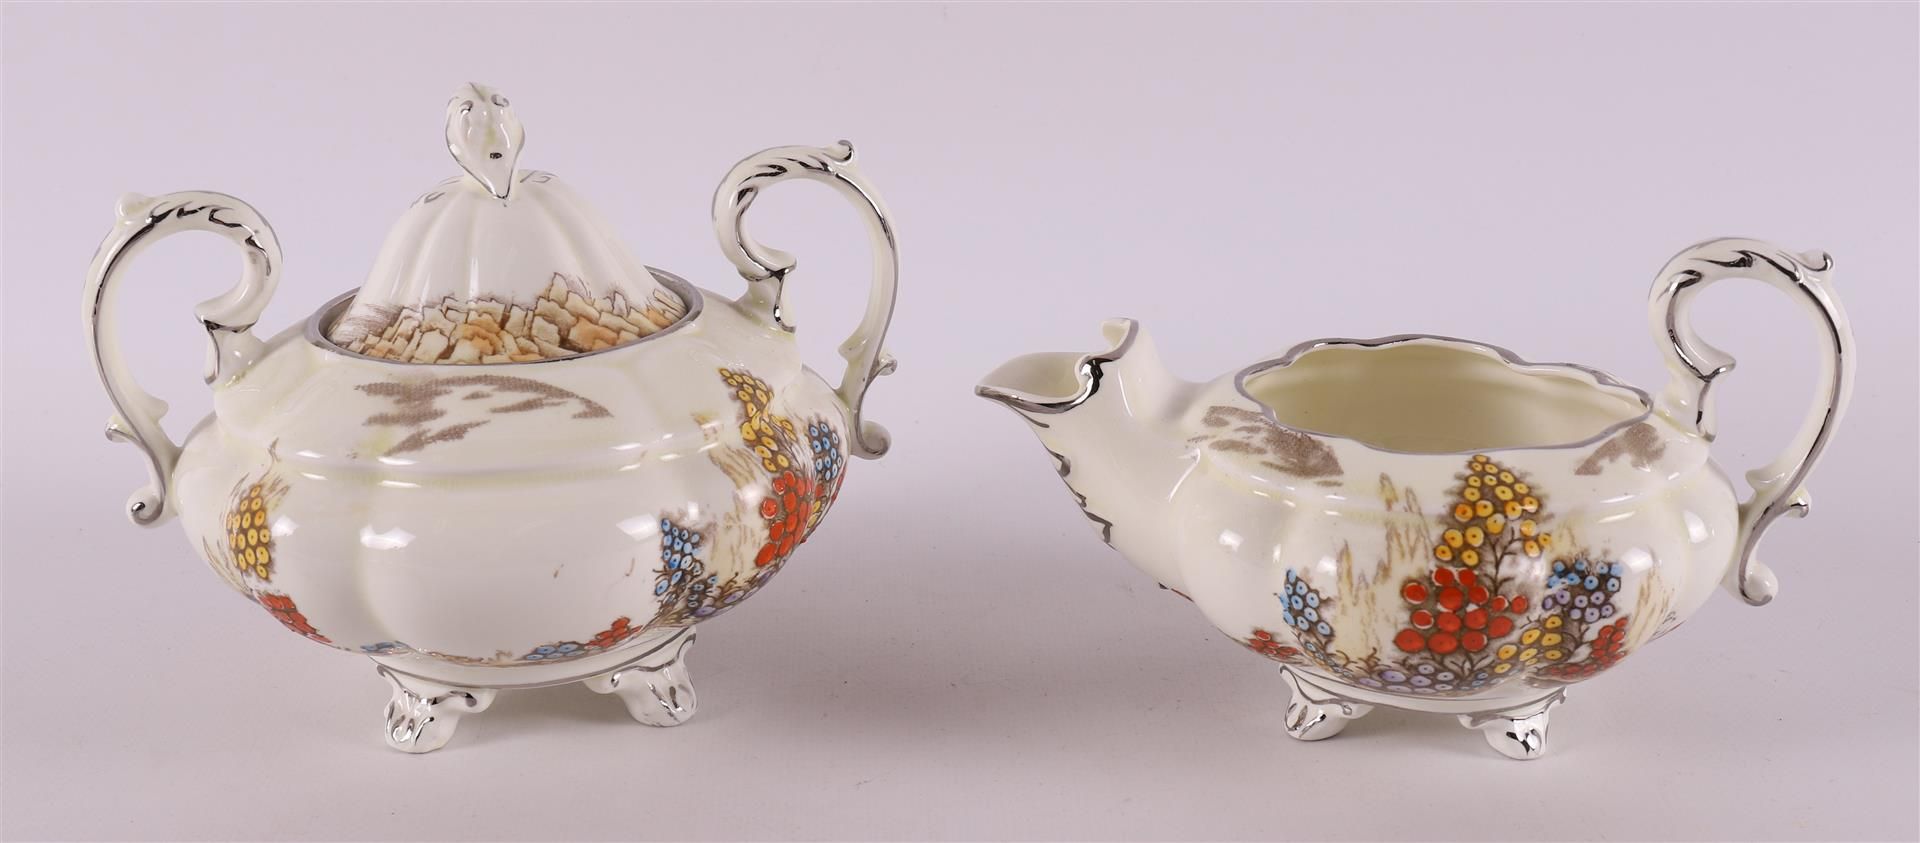 A creamware teapot with sugar bowl and milk jug, England, Stafford, 20th century - Image 7 of 12